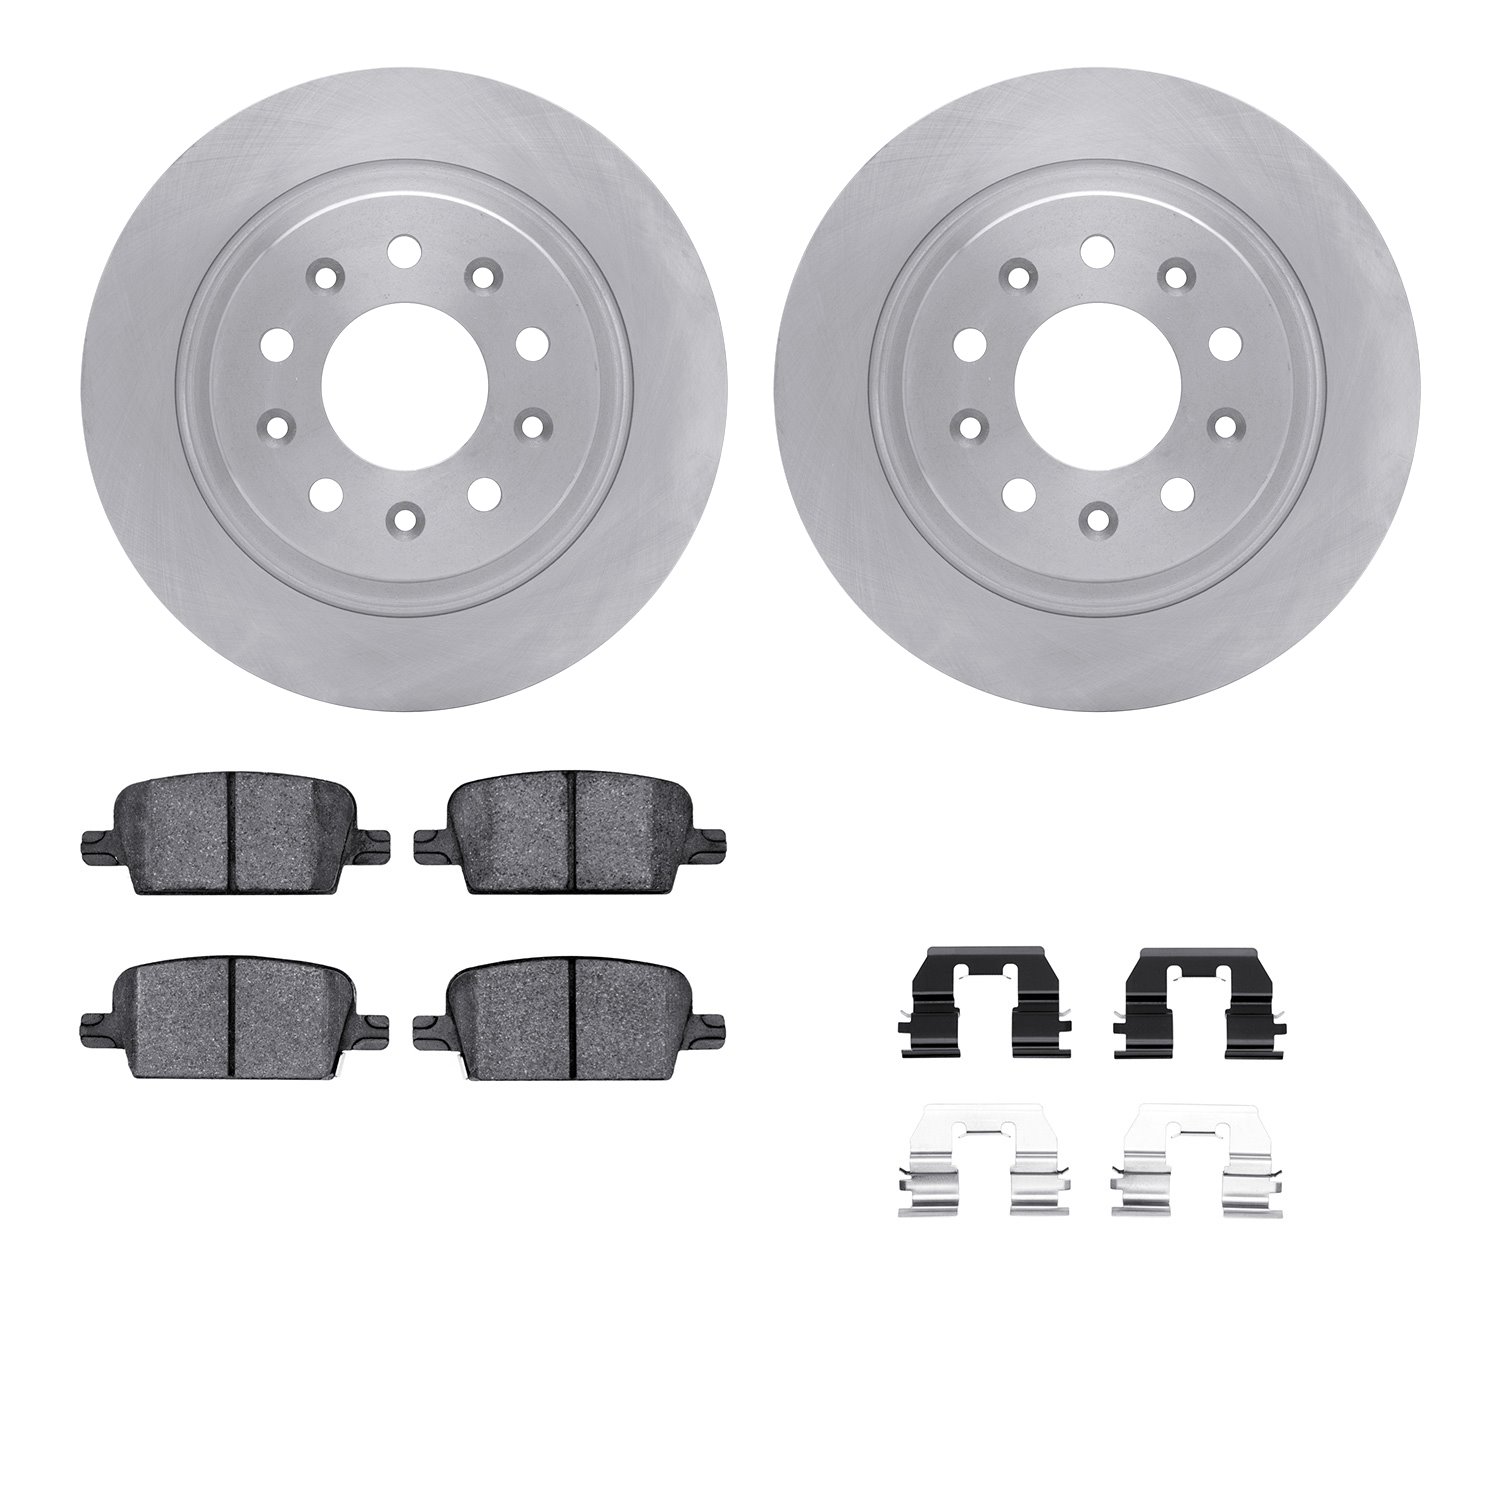 6312-47078 Brake Rotors with 3000-Series Ceramic Brake Pads Kit with Hardware, Fits Select GM, Position: Rear